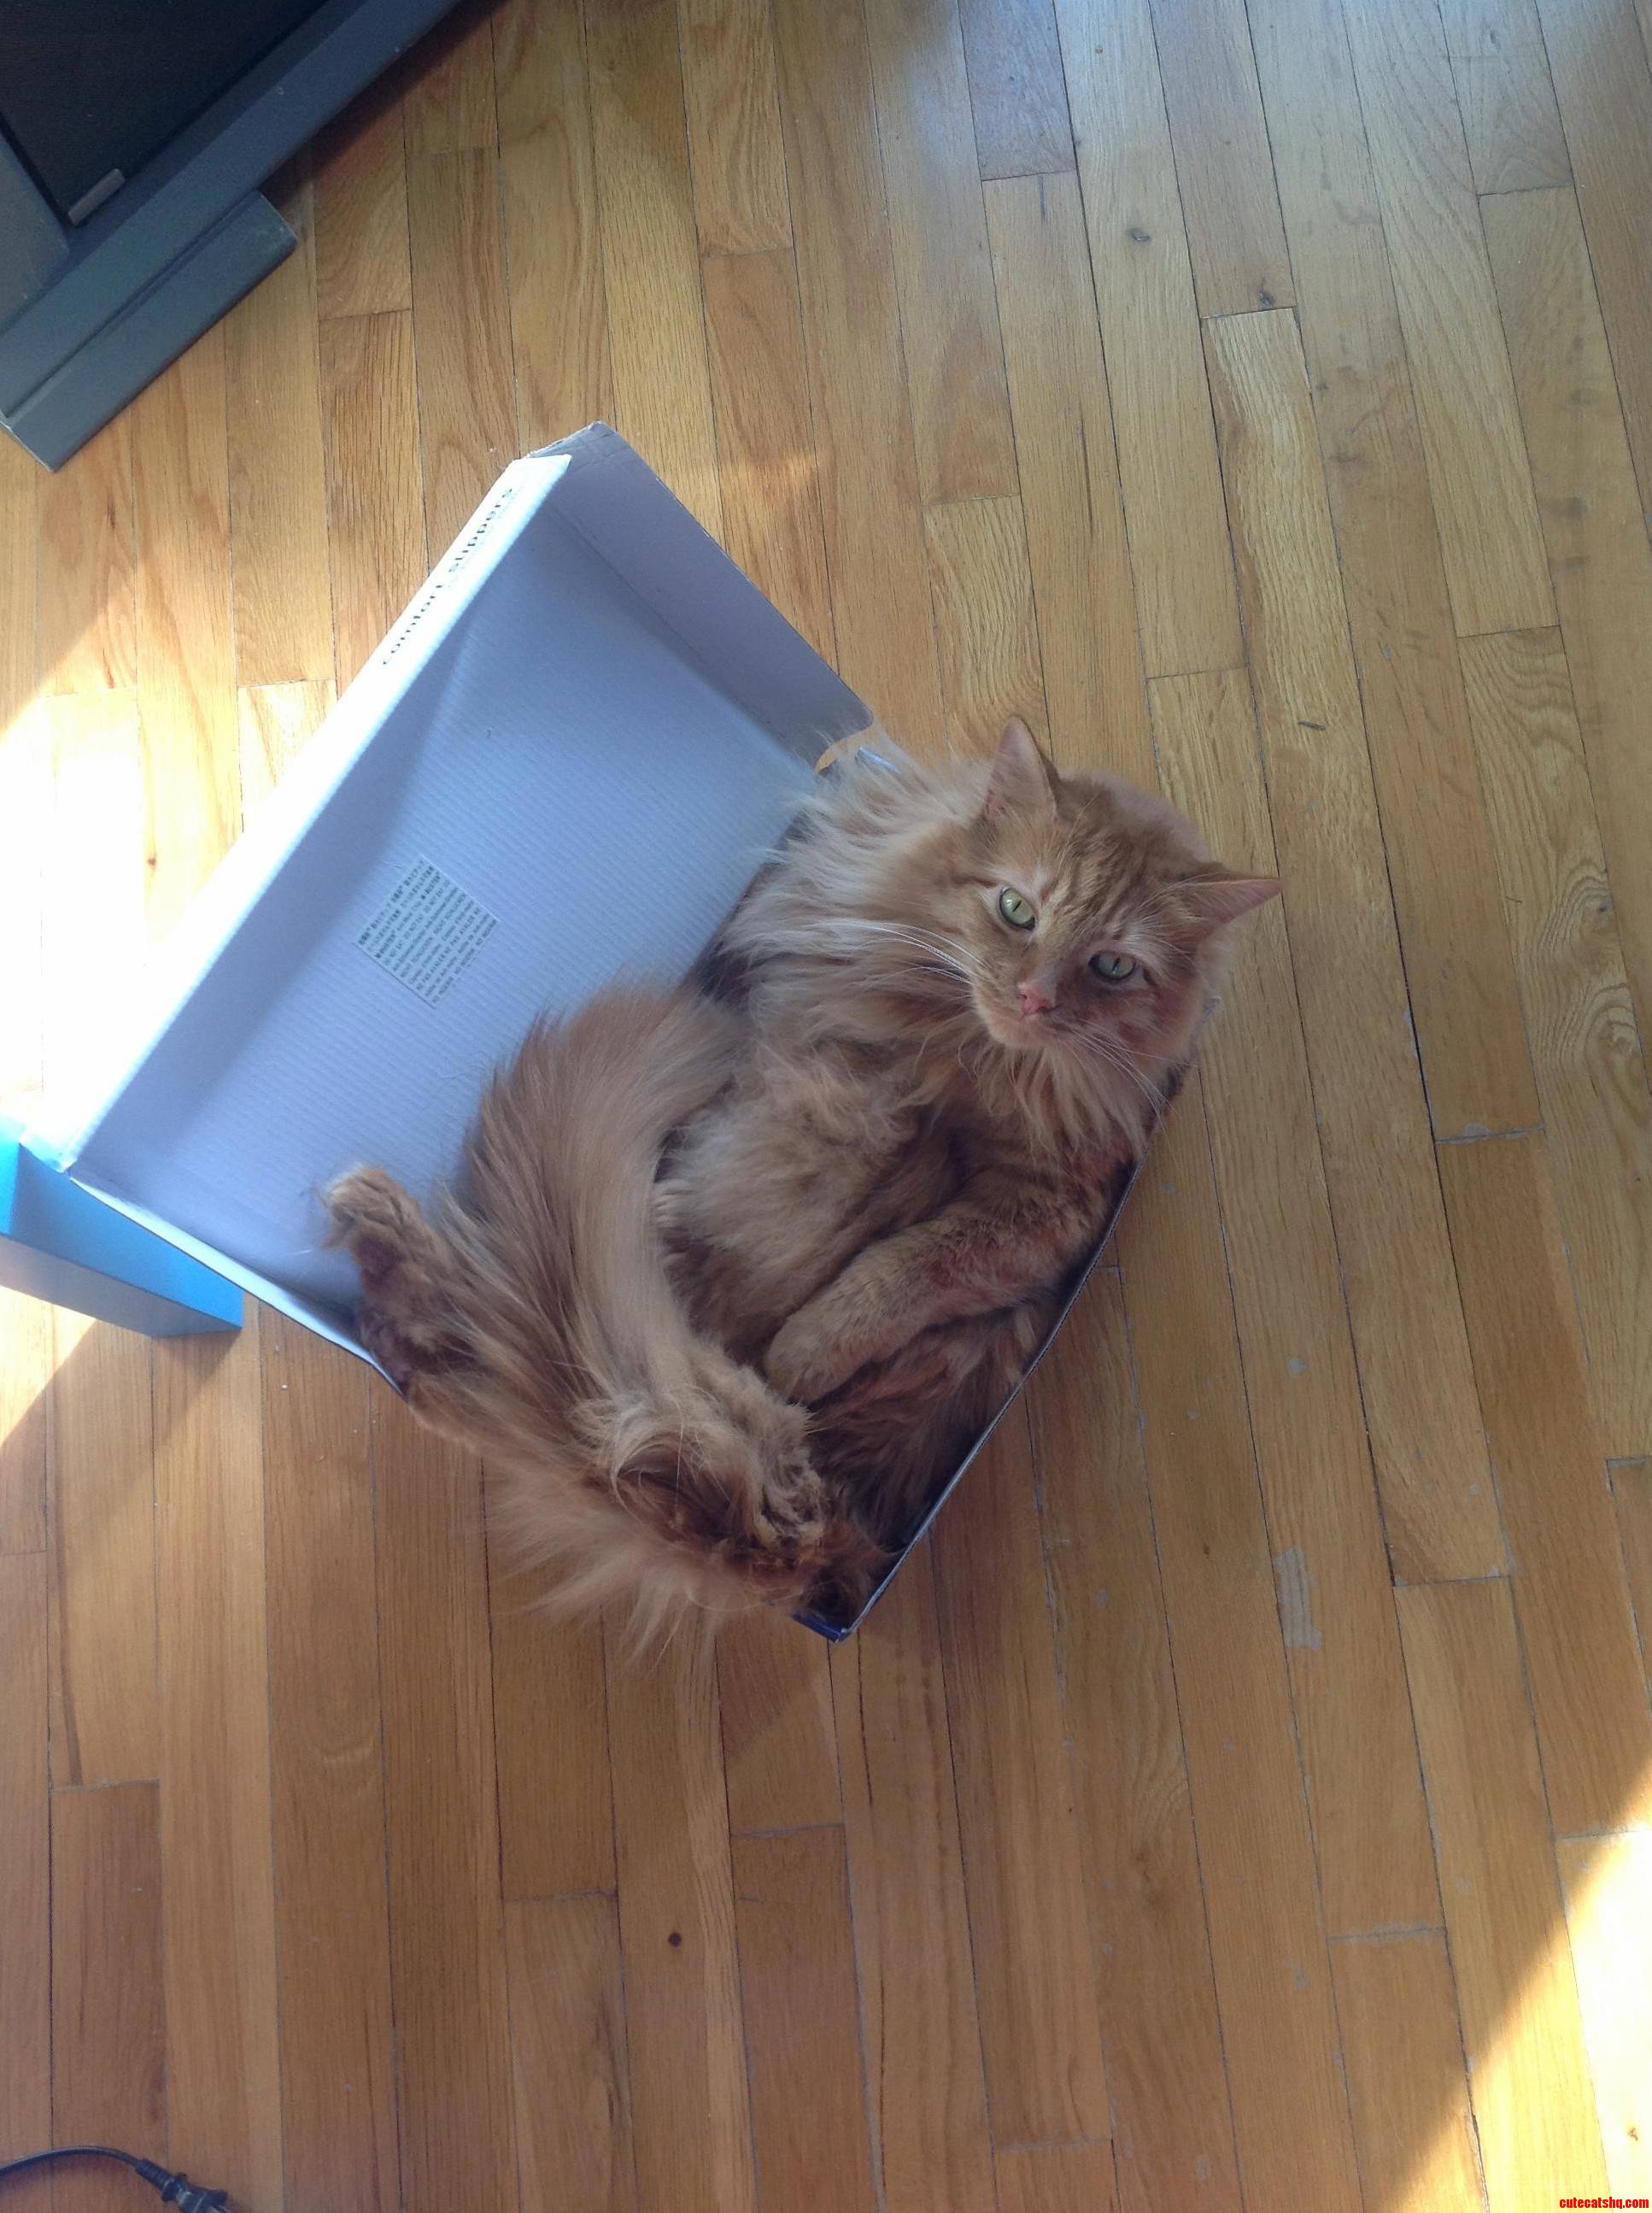 Hobbes really loves lying in his box